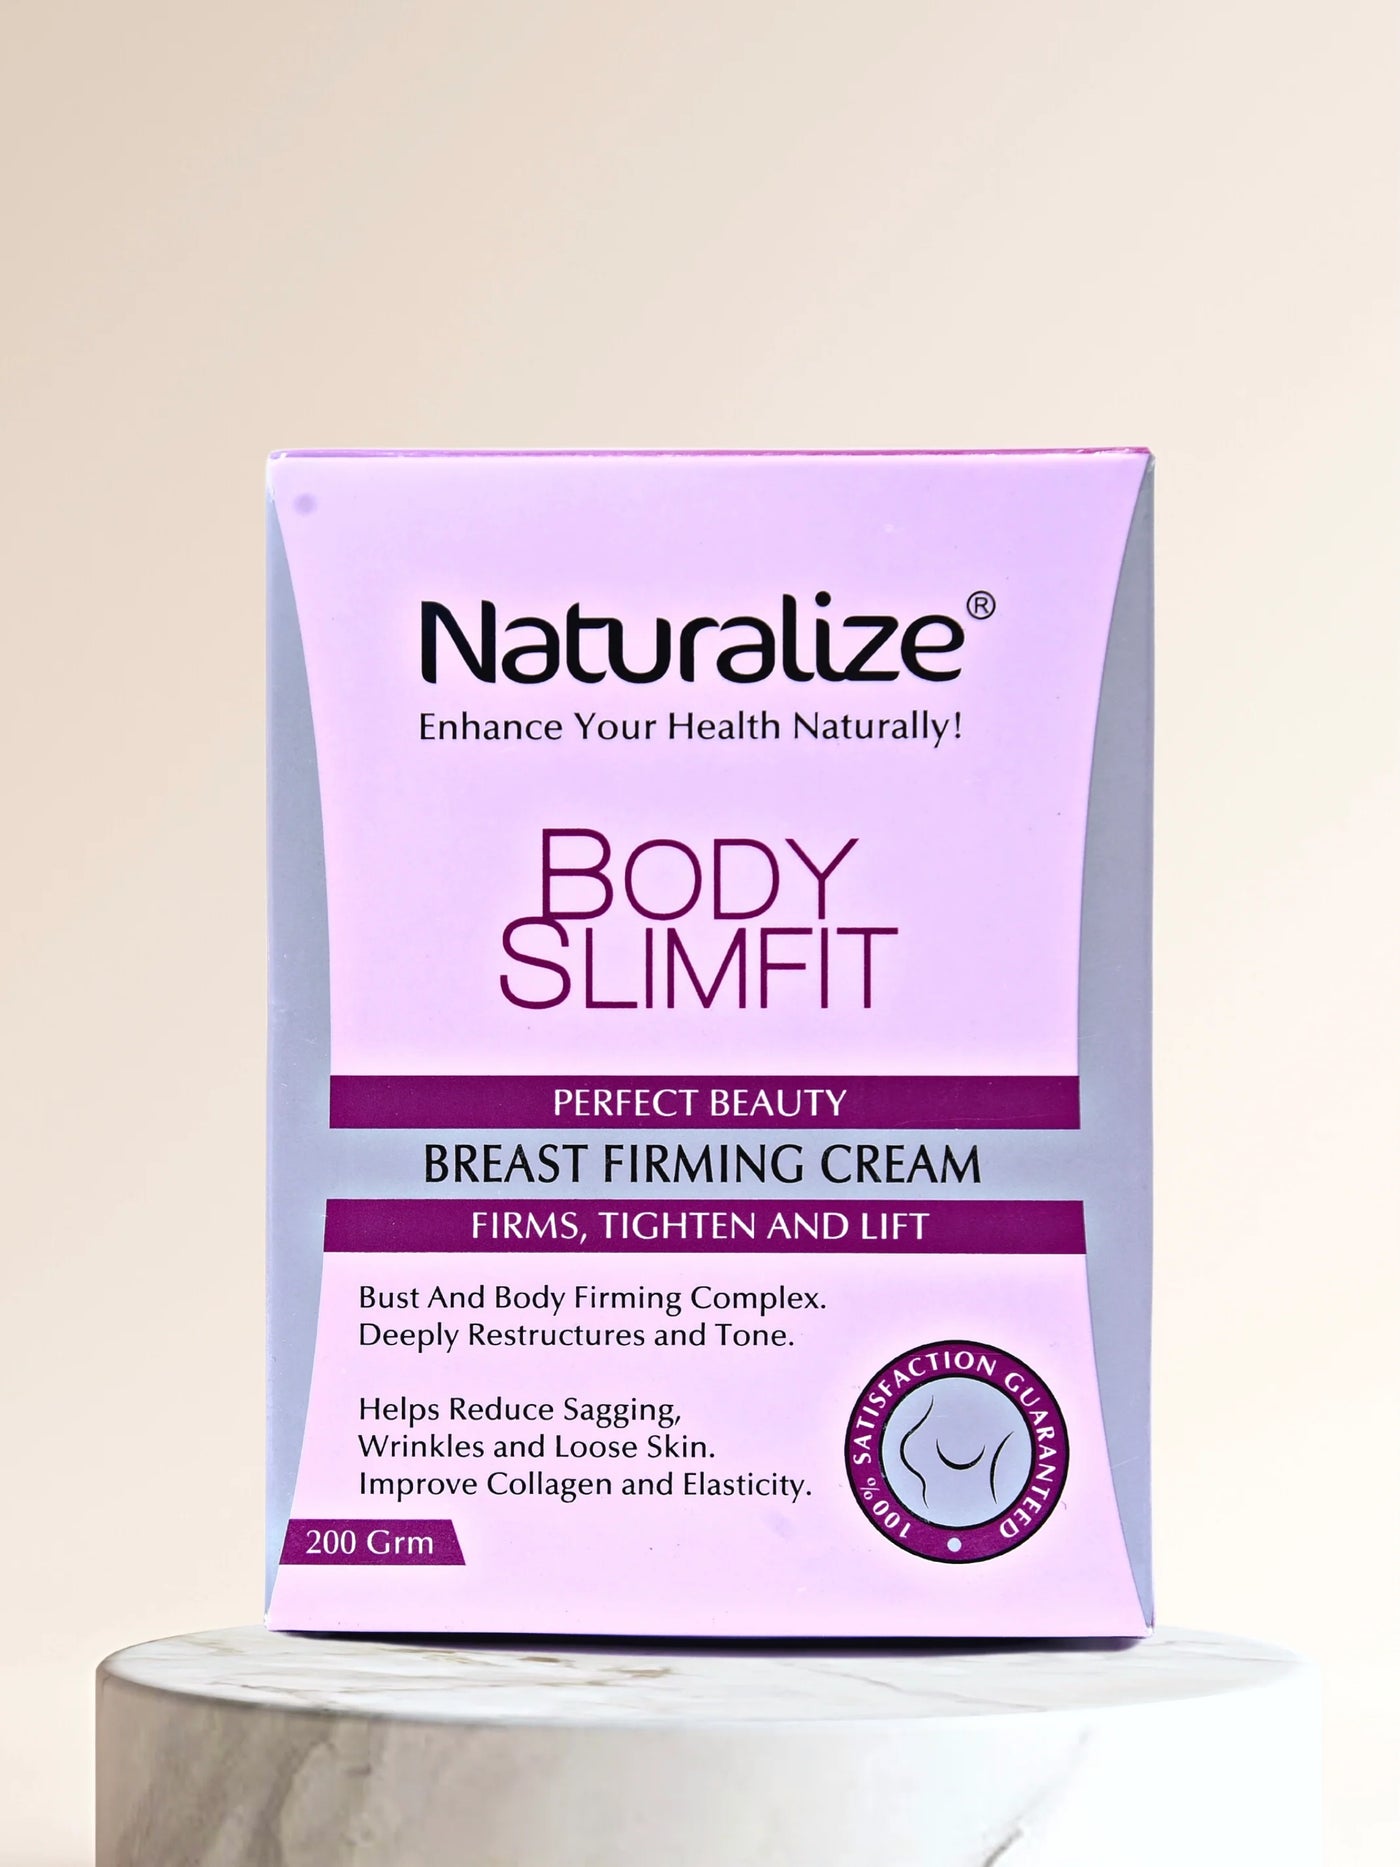 Body SlimFit Breast Firming Cream - Best for Firm,Tighten and Lift By Dr Bilquis Sheikh